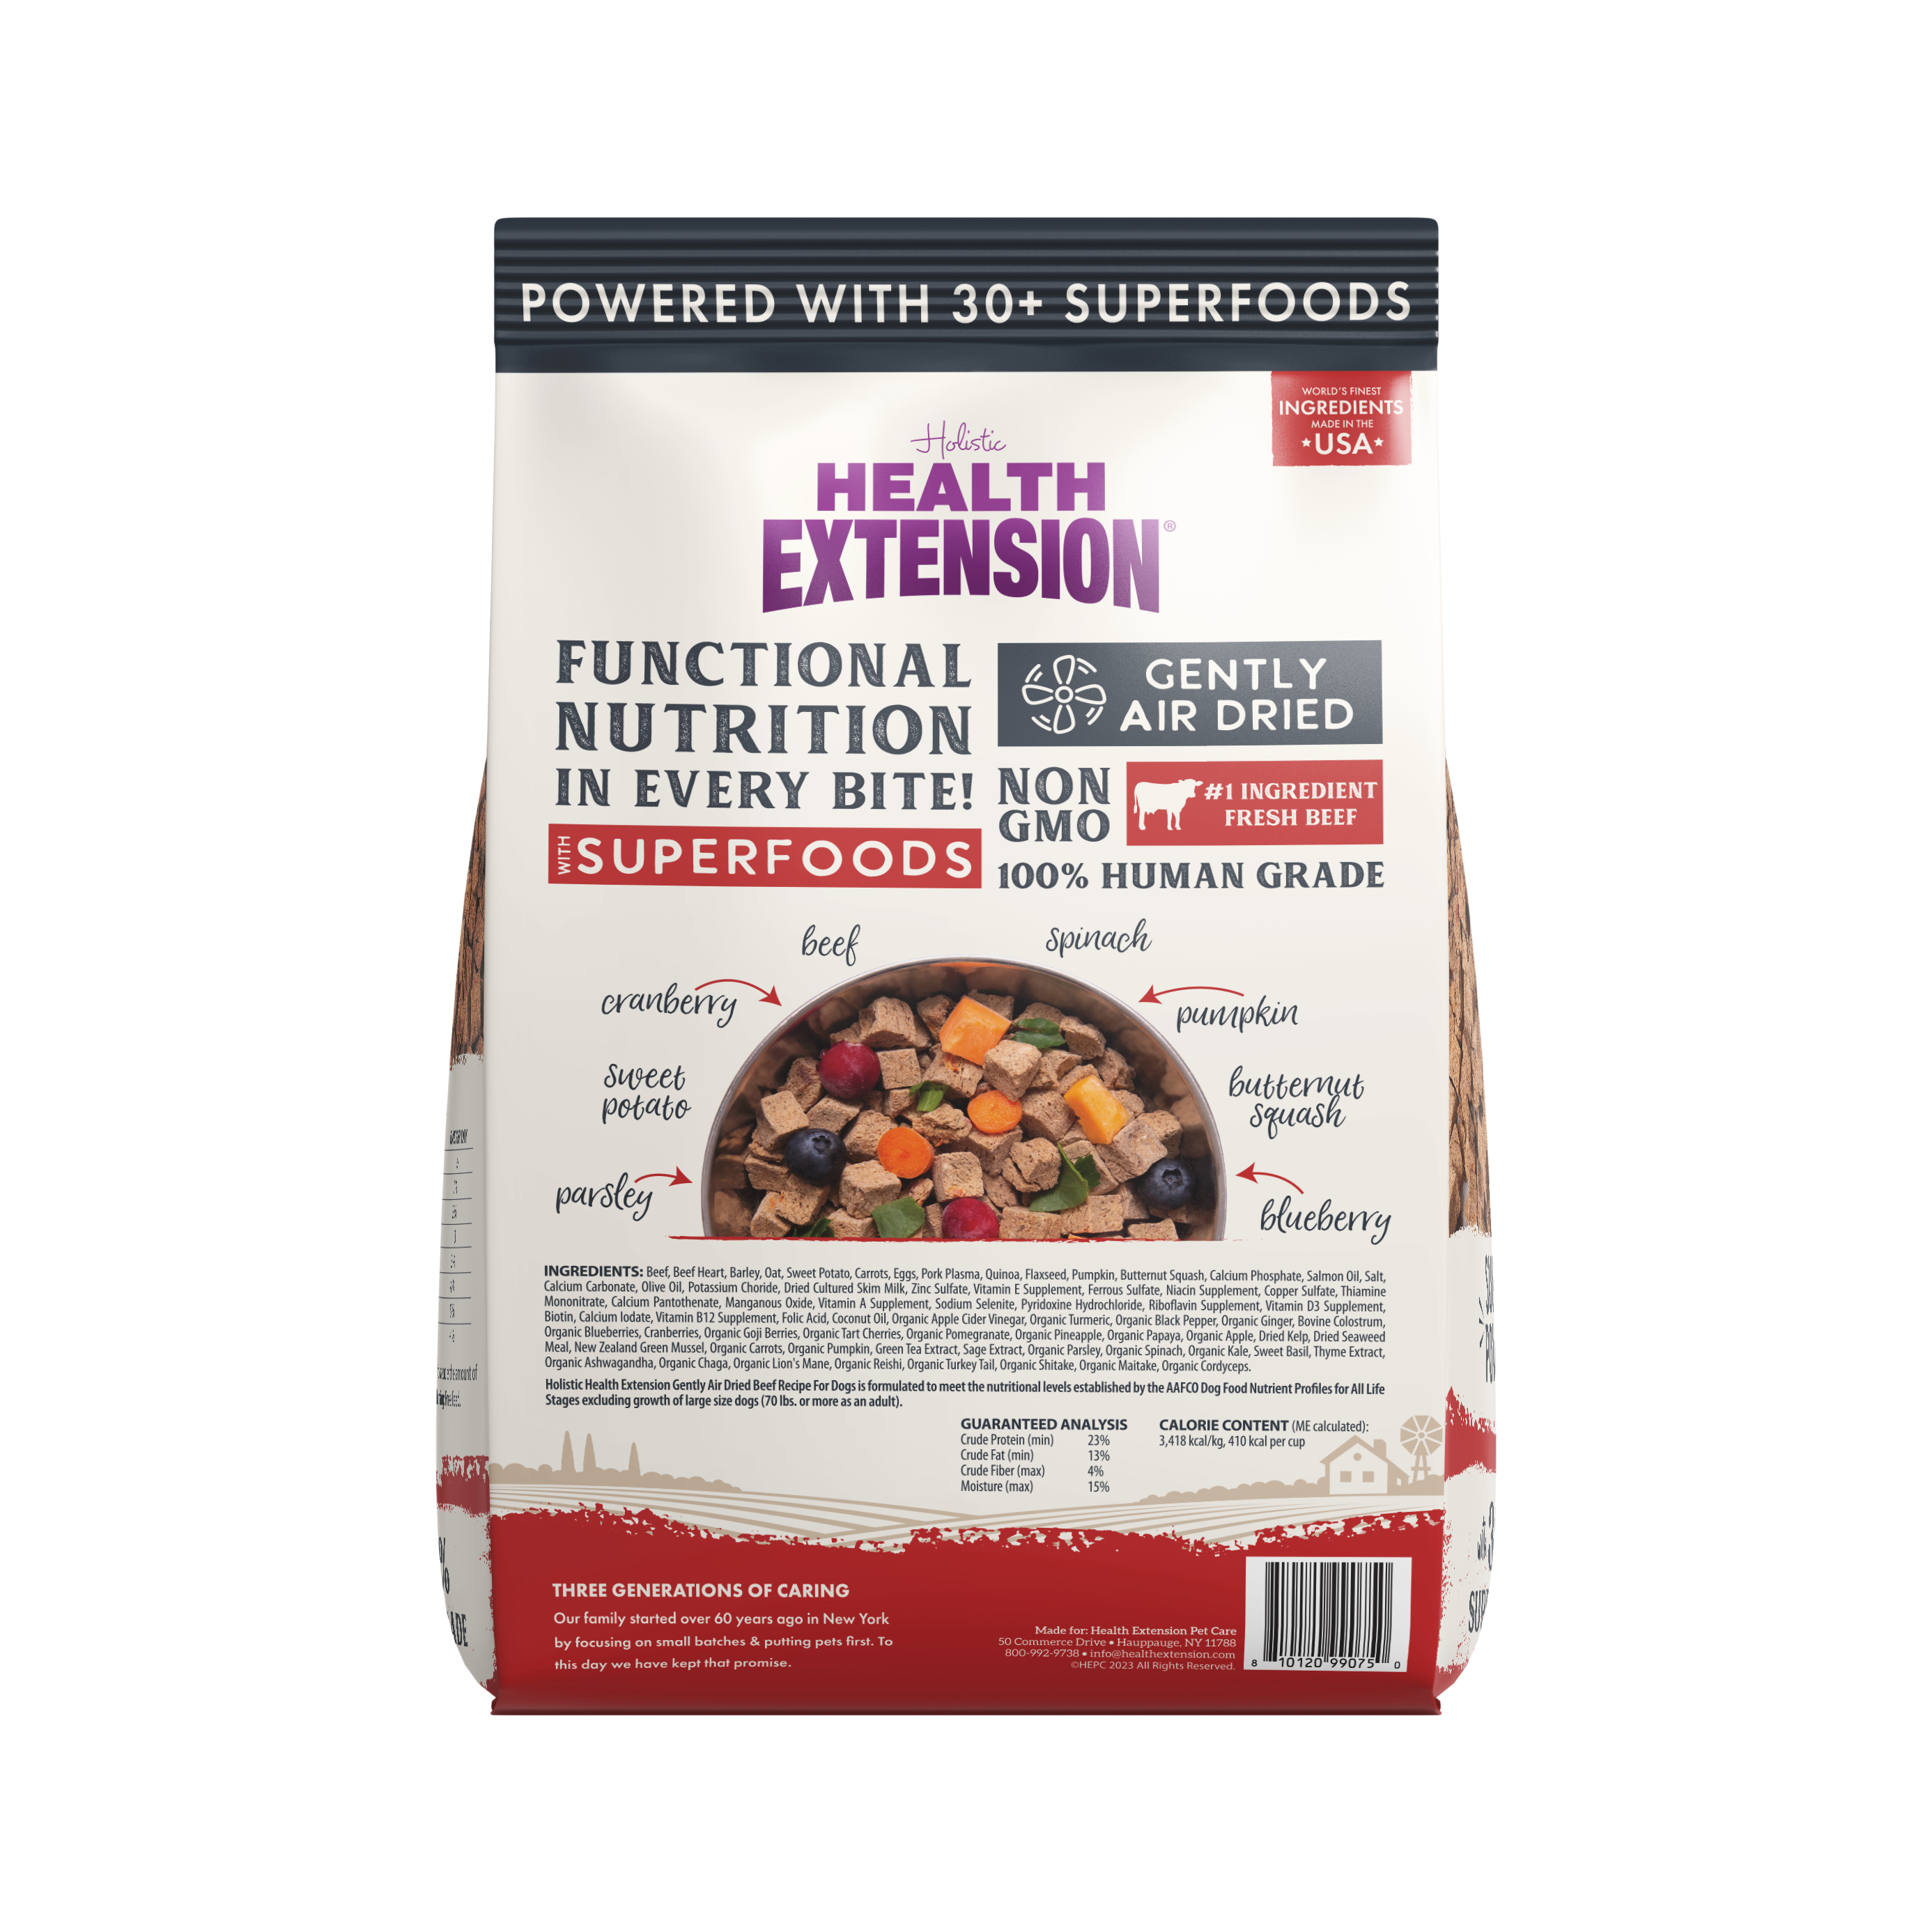 Back view of the Packaging of Health Extension Air Dried dog food featuring 30+ superfoods, Non-GMO, 100% Human Grade with key ingredients like beef, and a nod to the brand's family-owned, three-generation legacy.